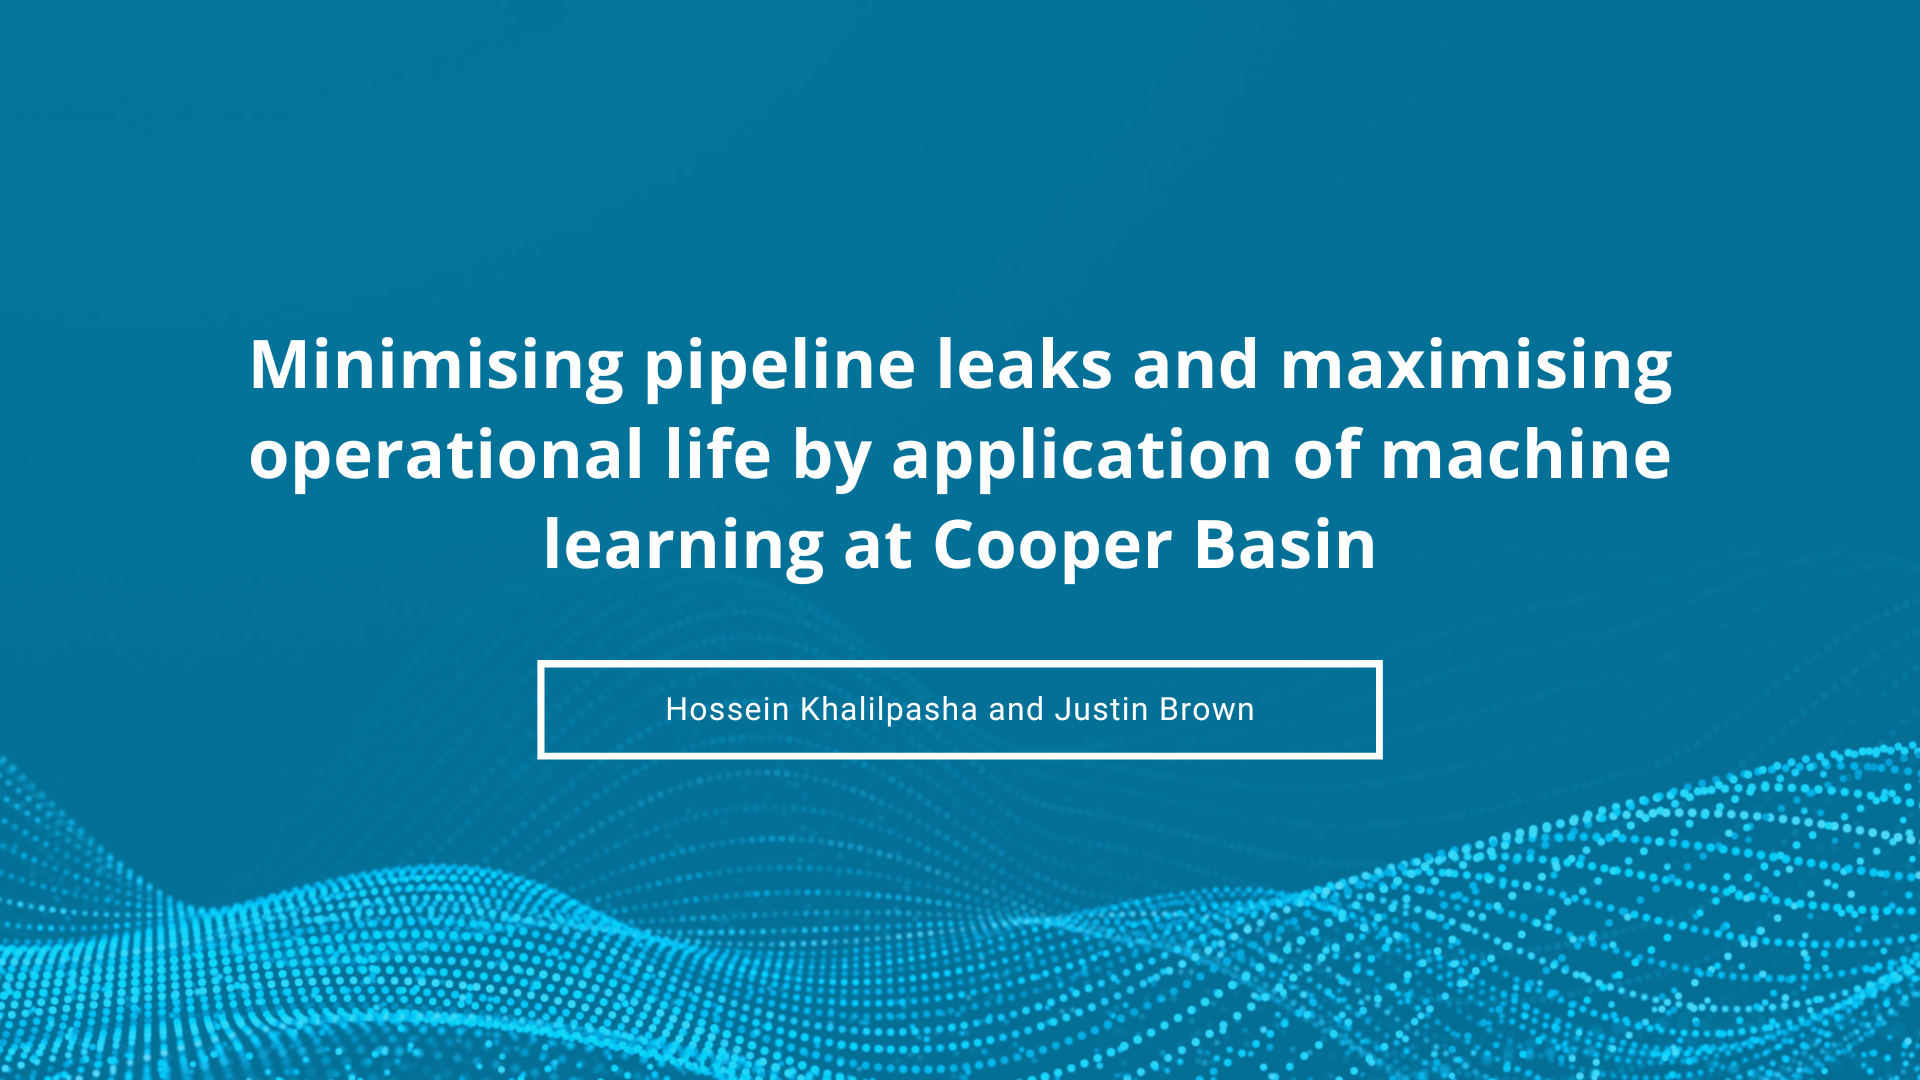 Minimising pipeline leaks and maximising operational life by application of machine learning at Cooper Basin